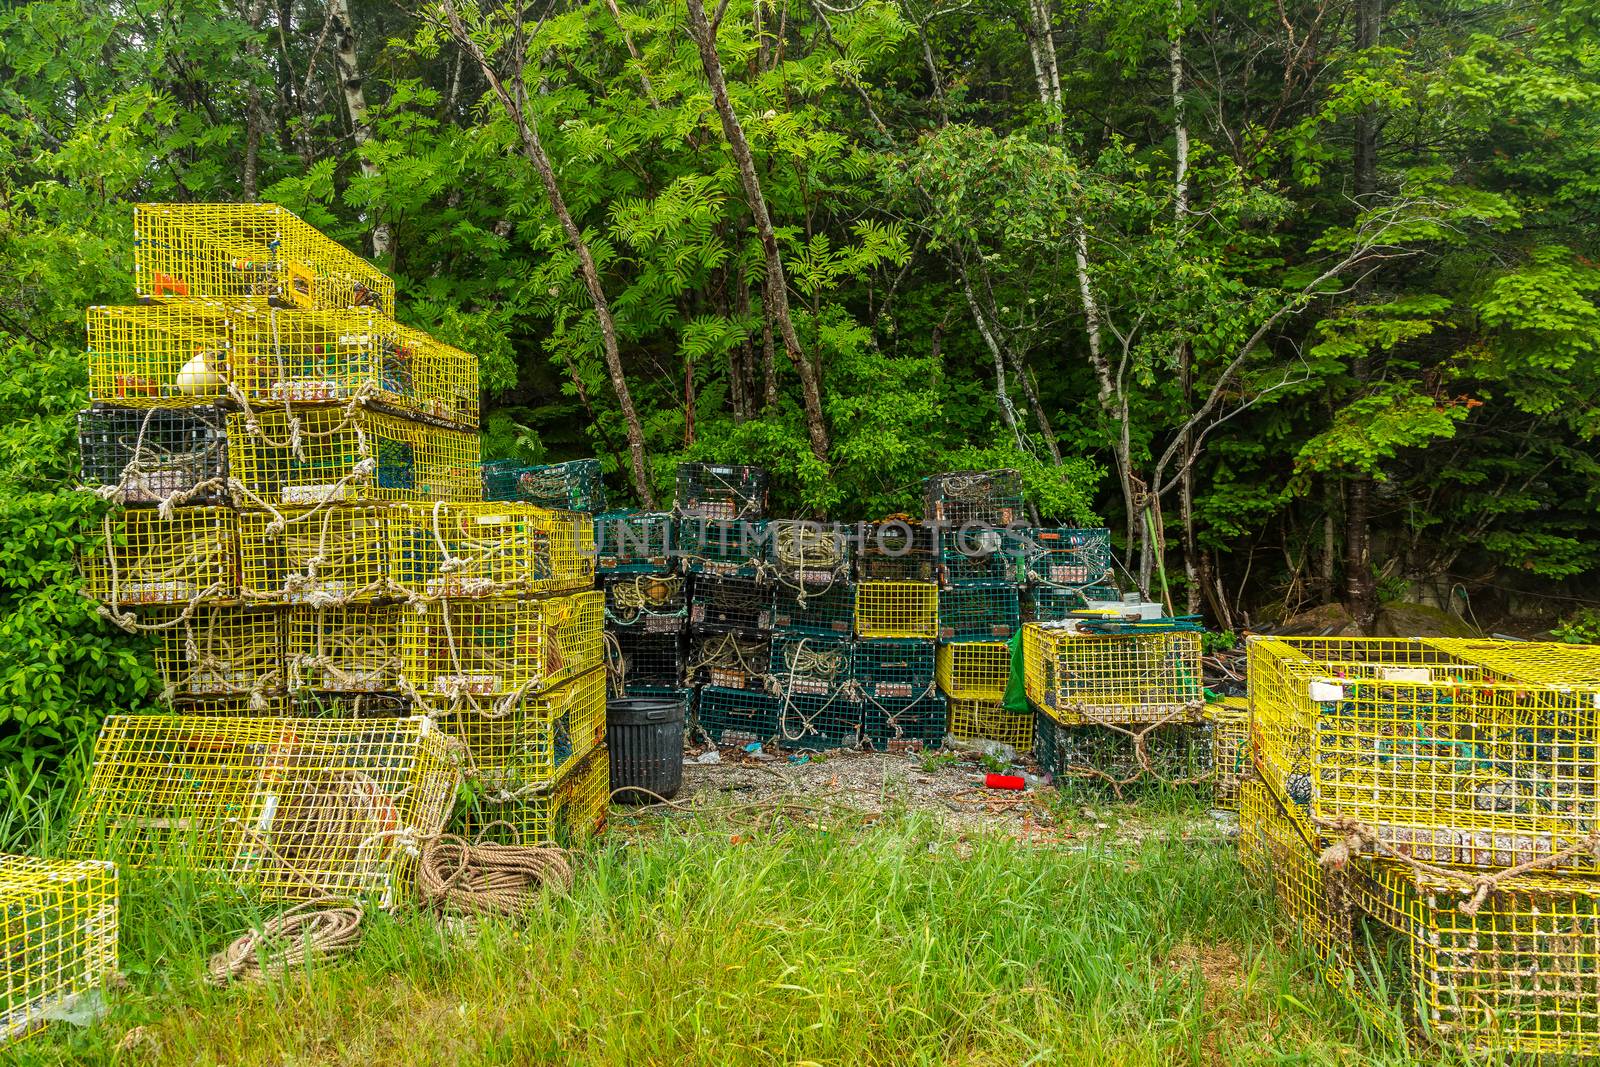 Lobster Traps await their next trip under the sea on the Schoodic Peninsula.